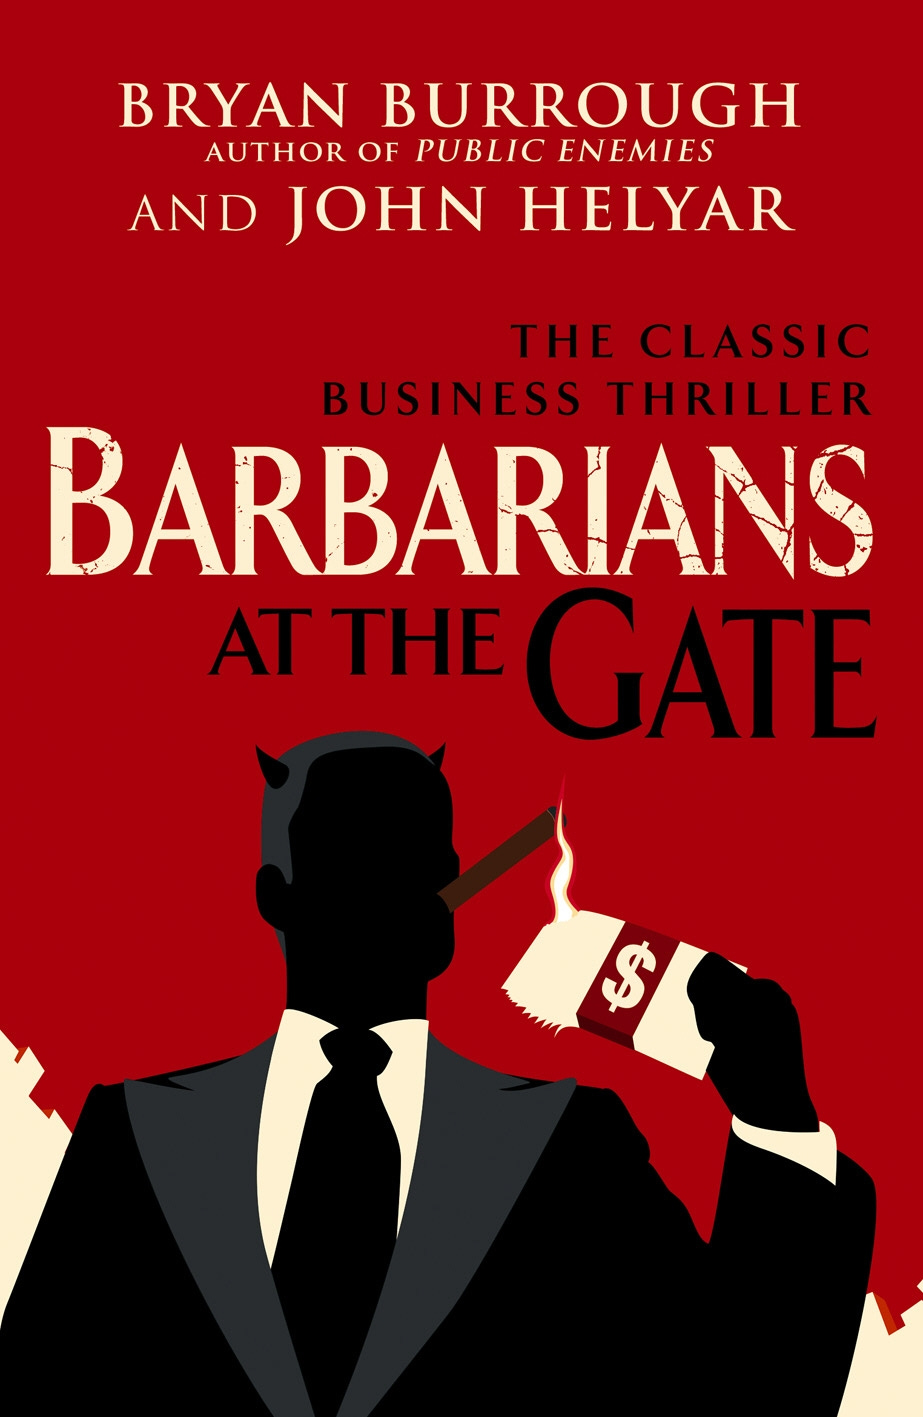 Barbarians At The Gate by Bryan Burrough - Penguin Books New Zealand